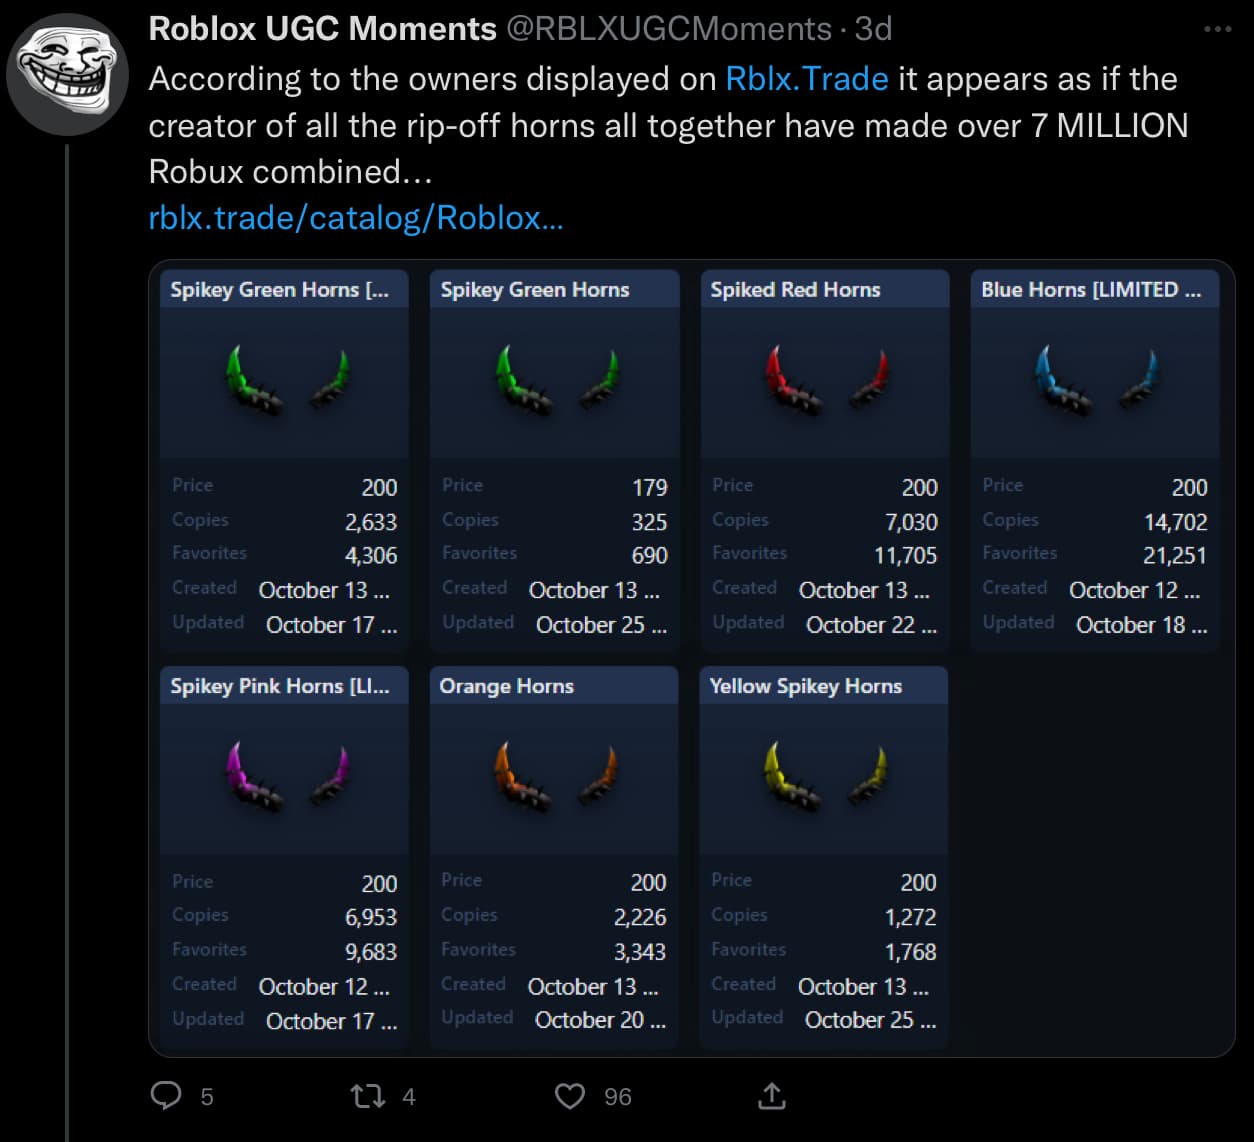 The UGC catalog in its current state is already disastrous